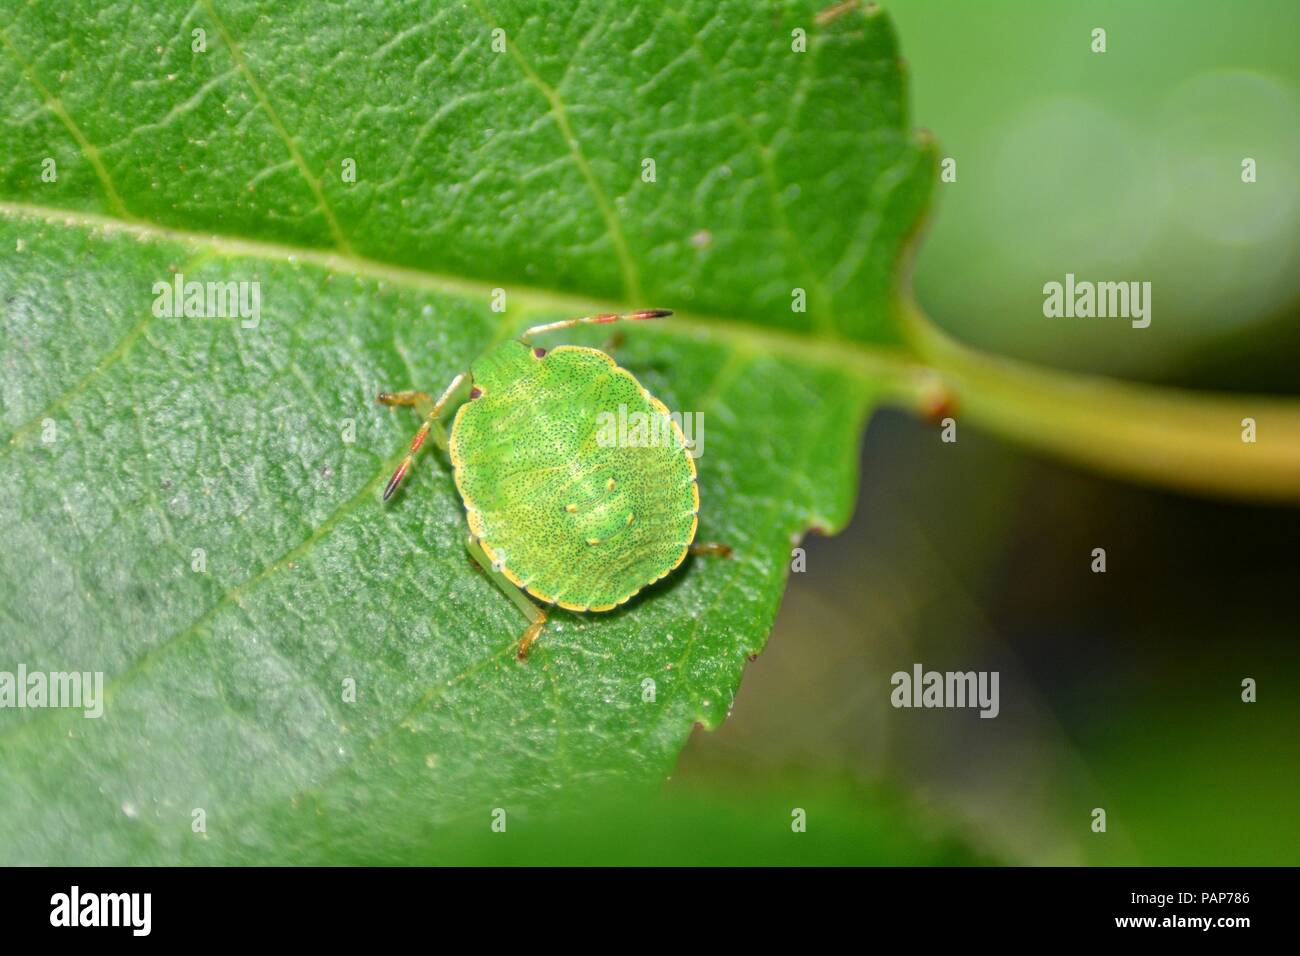 Nymph of a green stink bug  (  Palomena prasina  )  on green leaf in nature Stock Photo